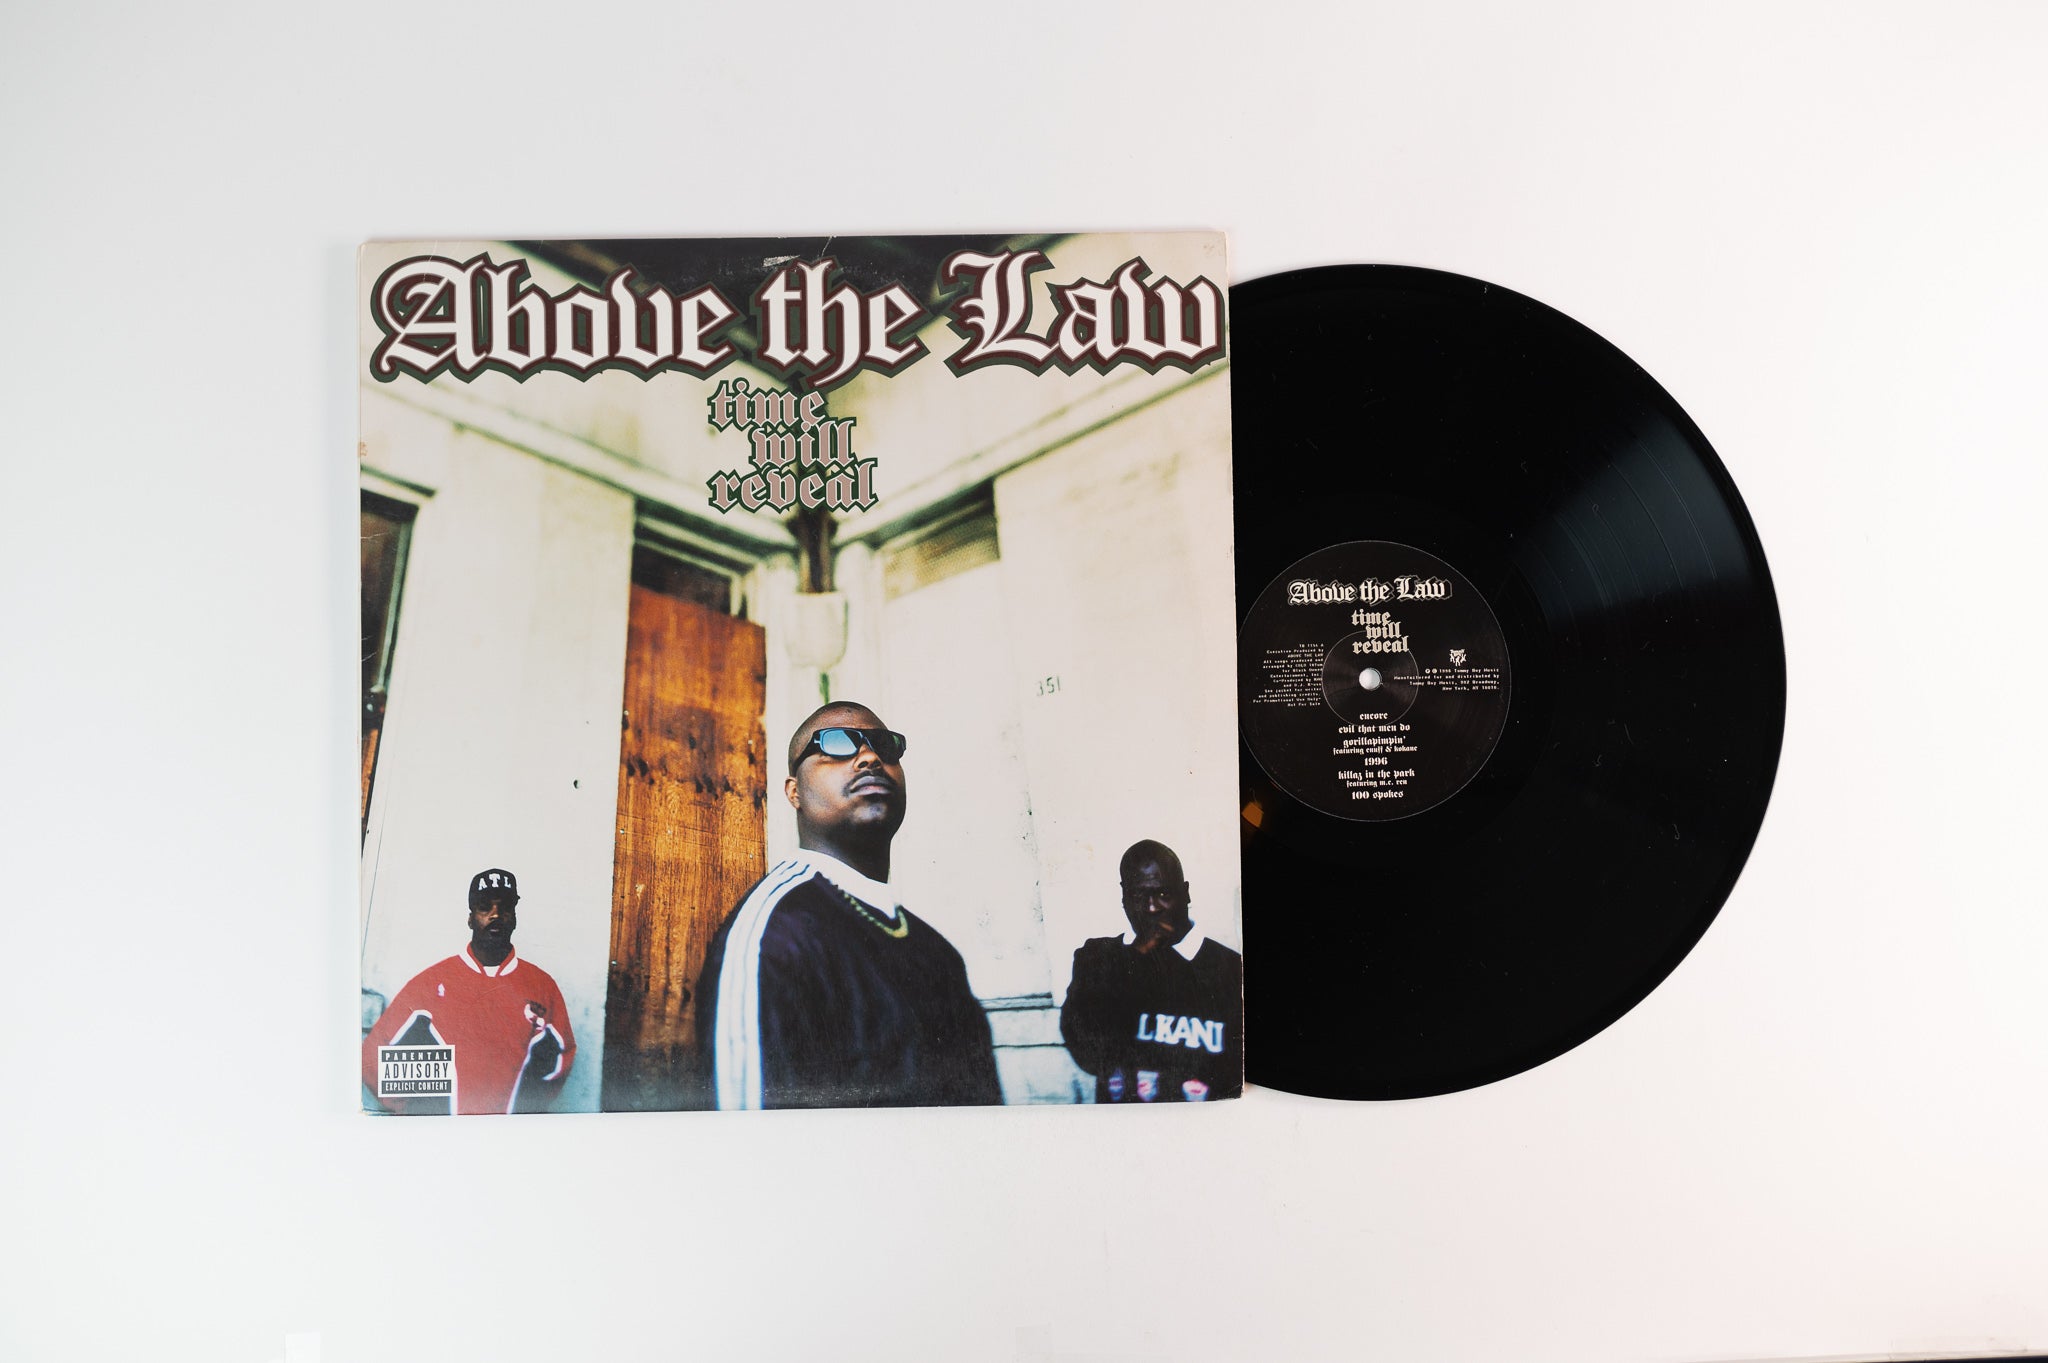 Above The Law - Time Will Reveal on Tommy Boy